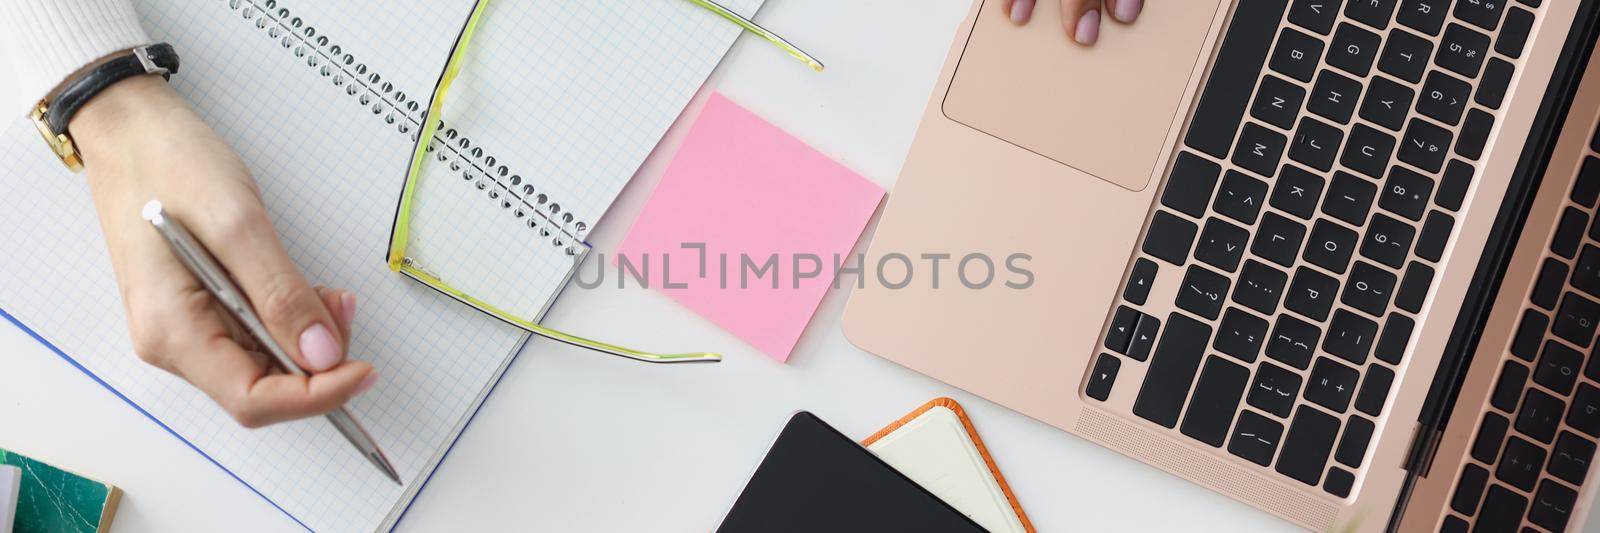 Top view of workplace with laptop device, notebook or planner, stationery, post it notes, smartphone. Working mess on desk, things for work. Technology, productivity, office life, mockup concept